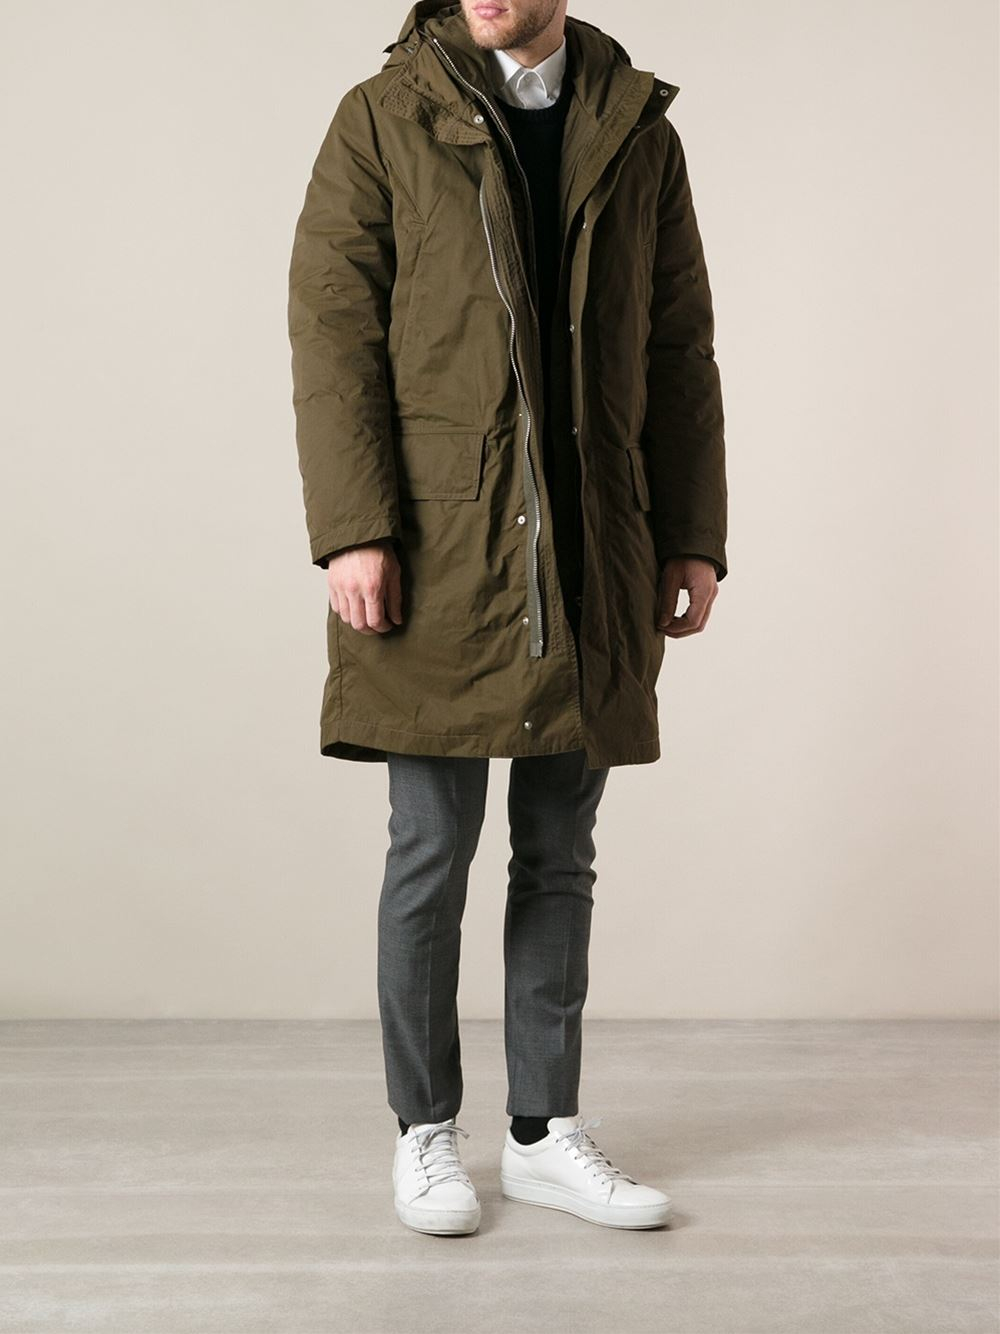 Acne Studios 'Montreal' Parka in Green for Men - Lyst